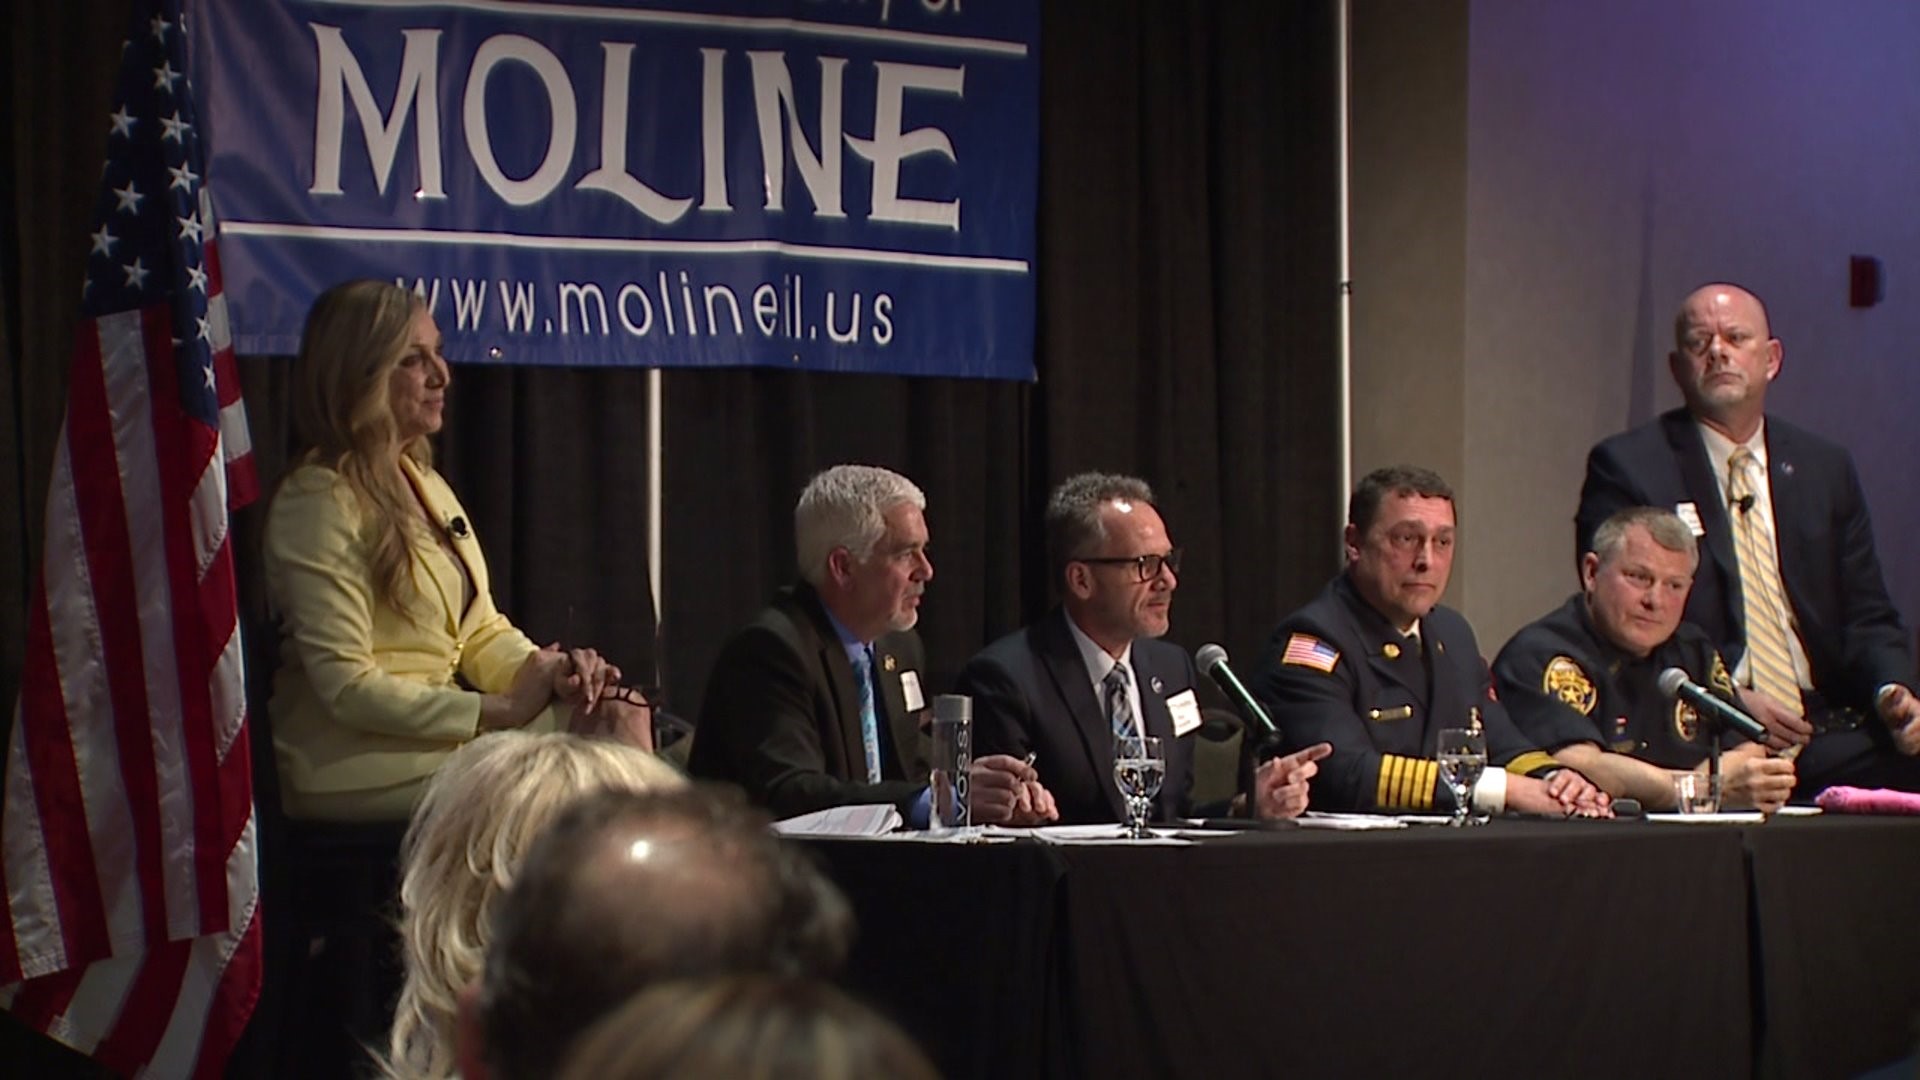 City of Moline using teamwork to handle new leadership transitions